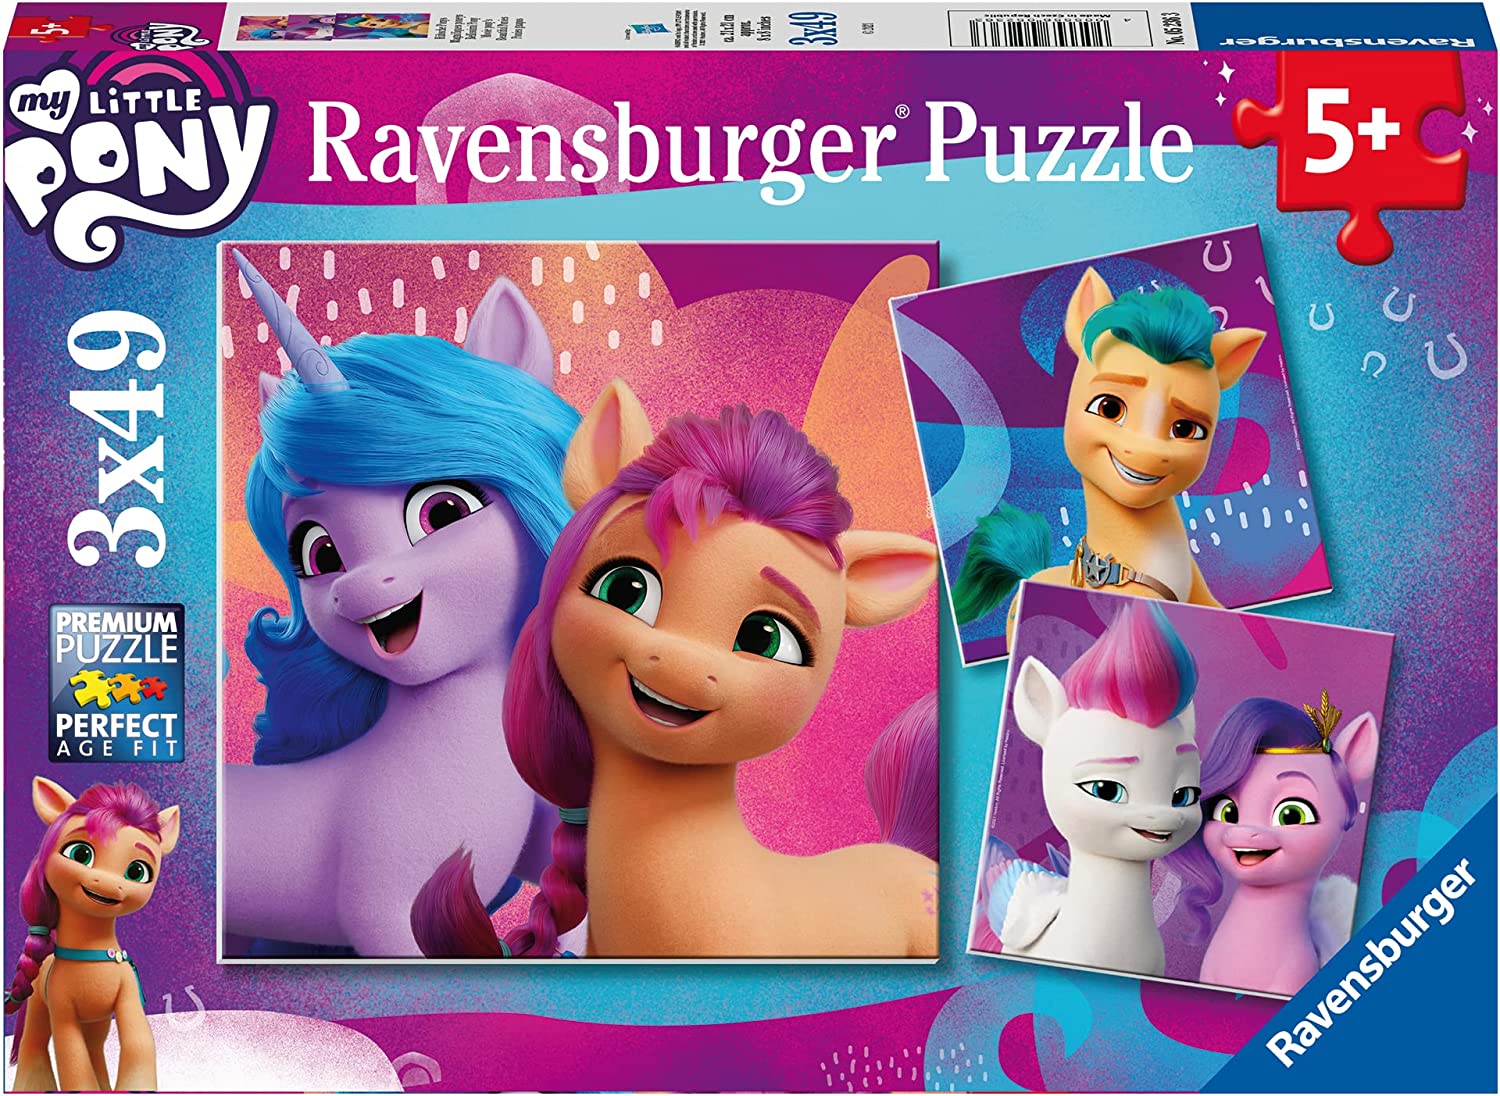 MLP: ANG Movie Mane 5 35 Piece Jigsaw Puzzle